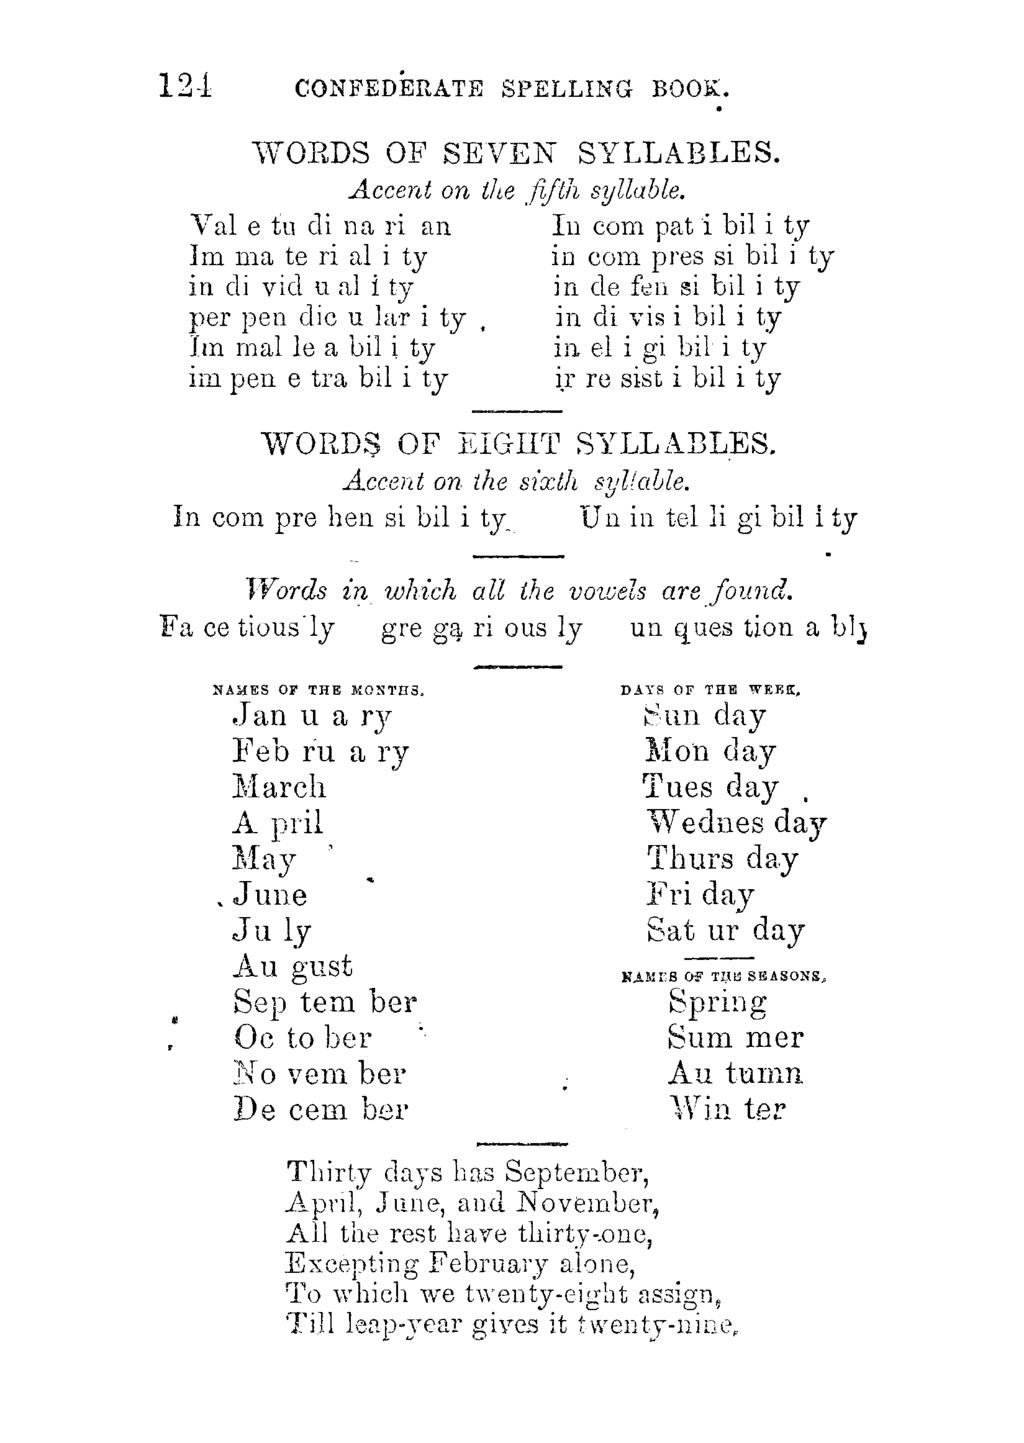 12-1 CONFEDERATE SPELLING BOOK. WOBDS OF SEVEN SYLLABLES. Accent on thefifthsyllable.